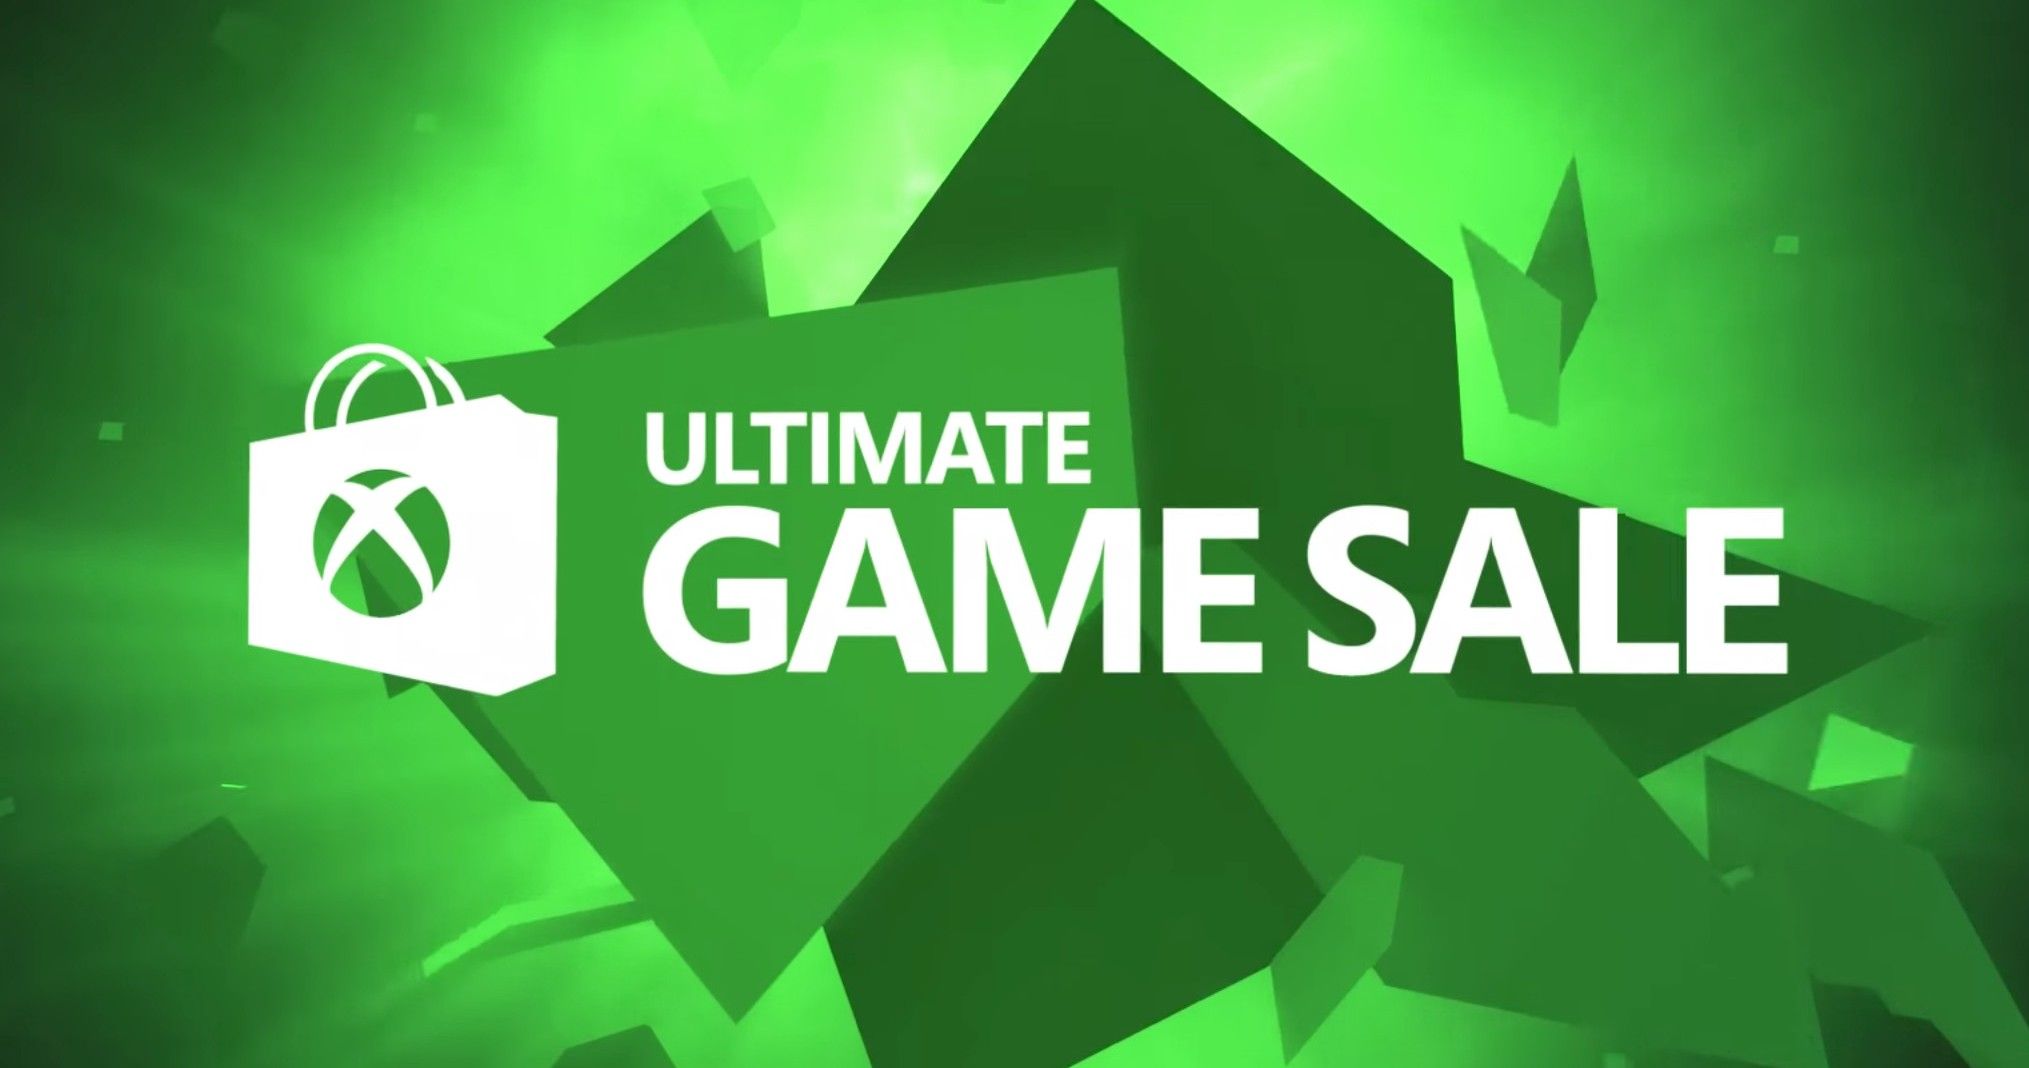 xbox ultimate game sale 2020